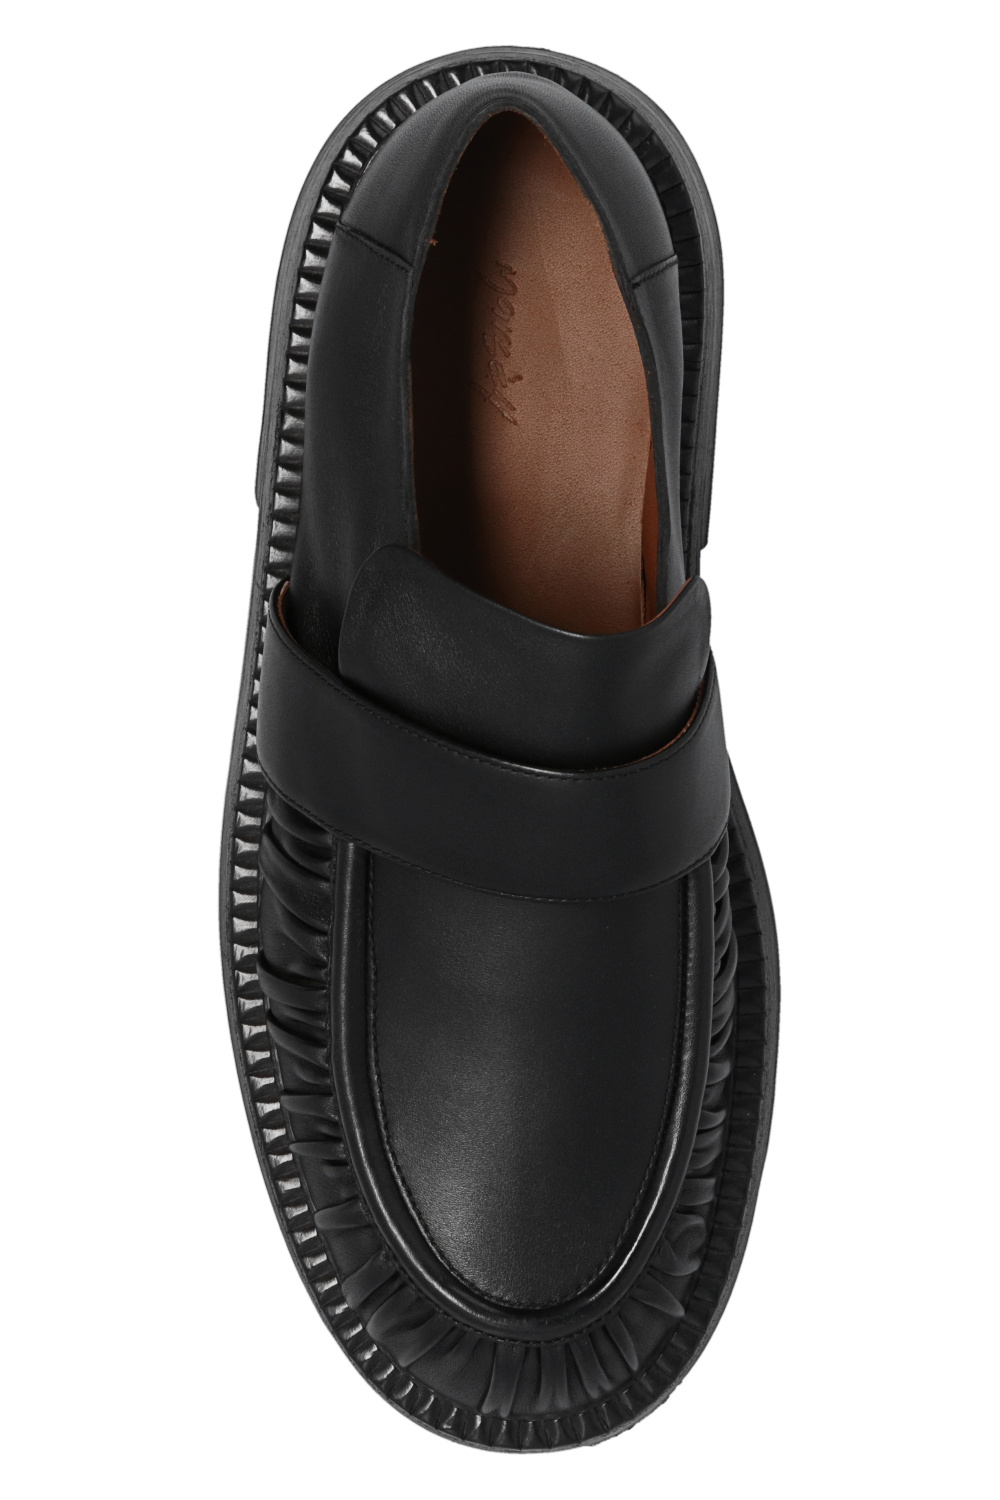 Marsell ‘Alluce’ leather shoes